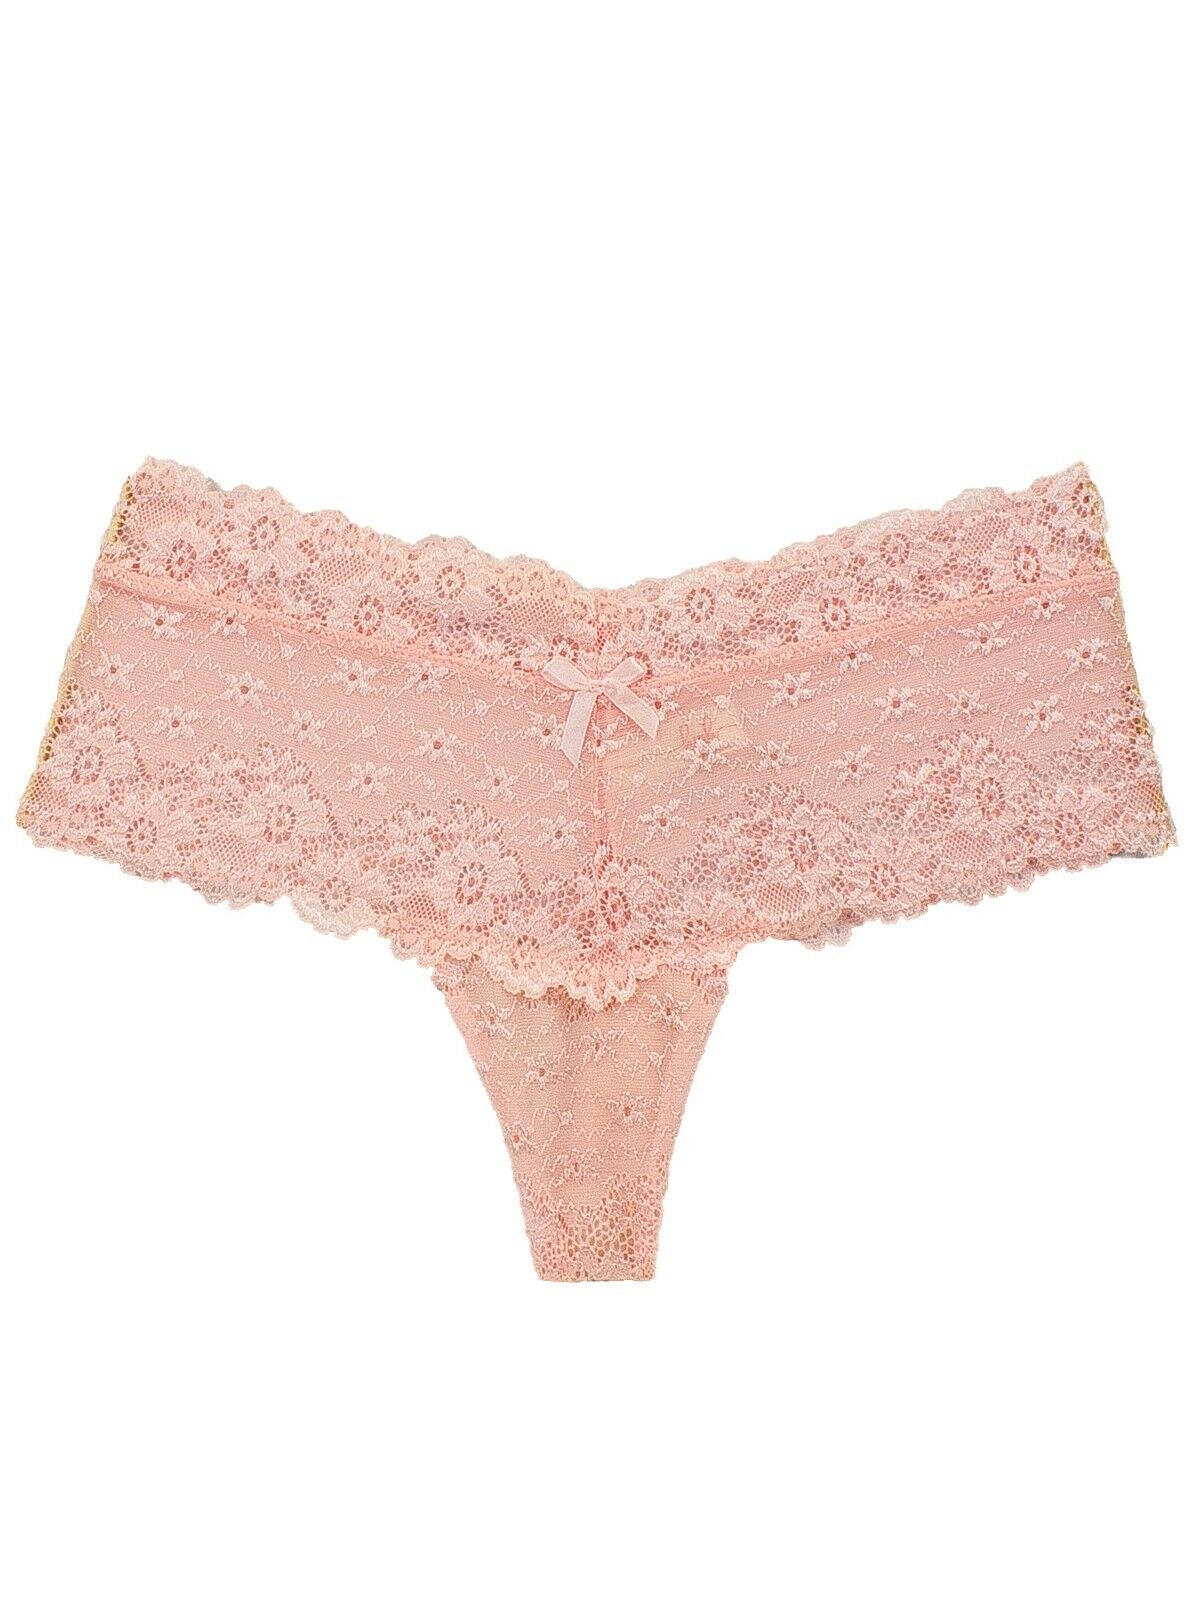 Barbra Lingerie Thongs Underwear for Women 6 Pack Lace Sexy Female ...